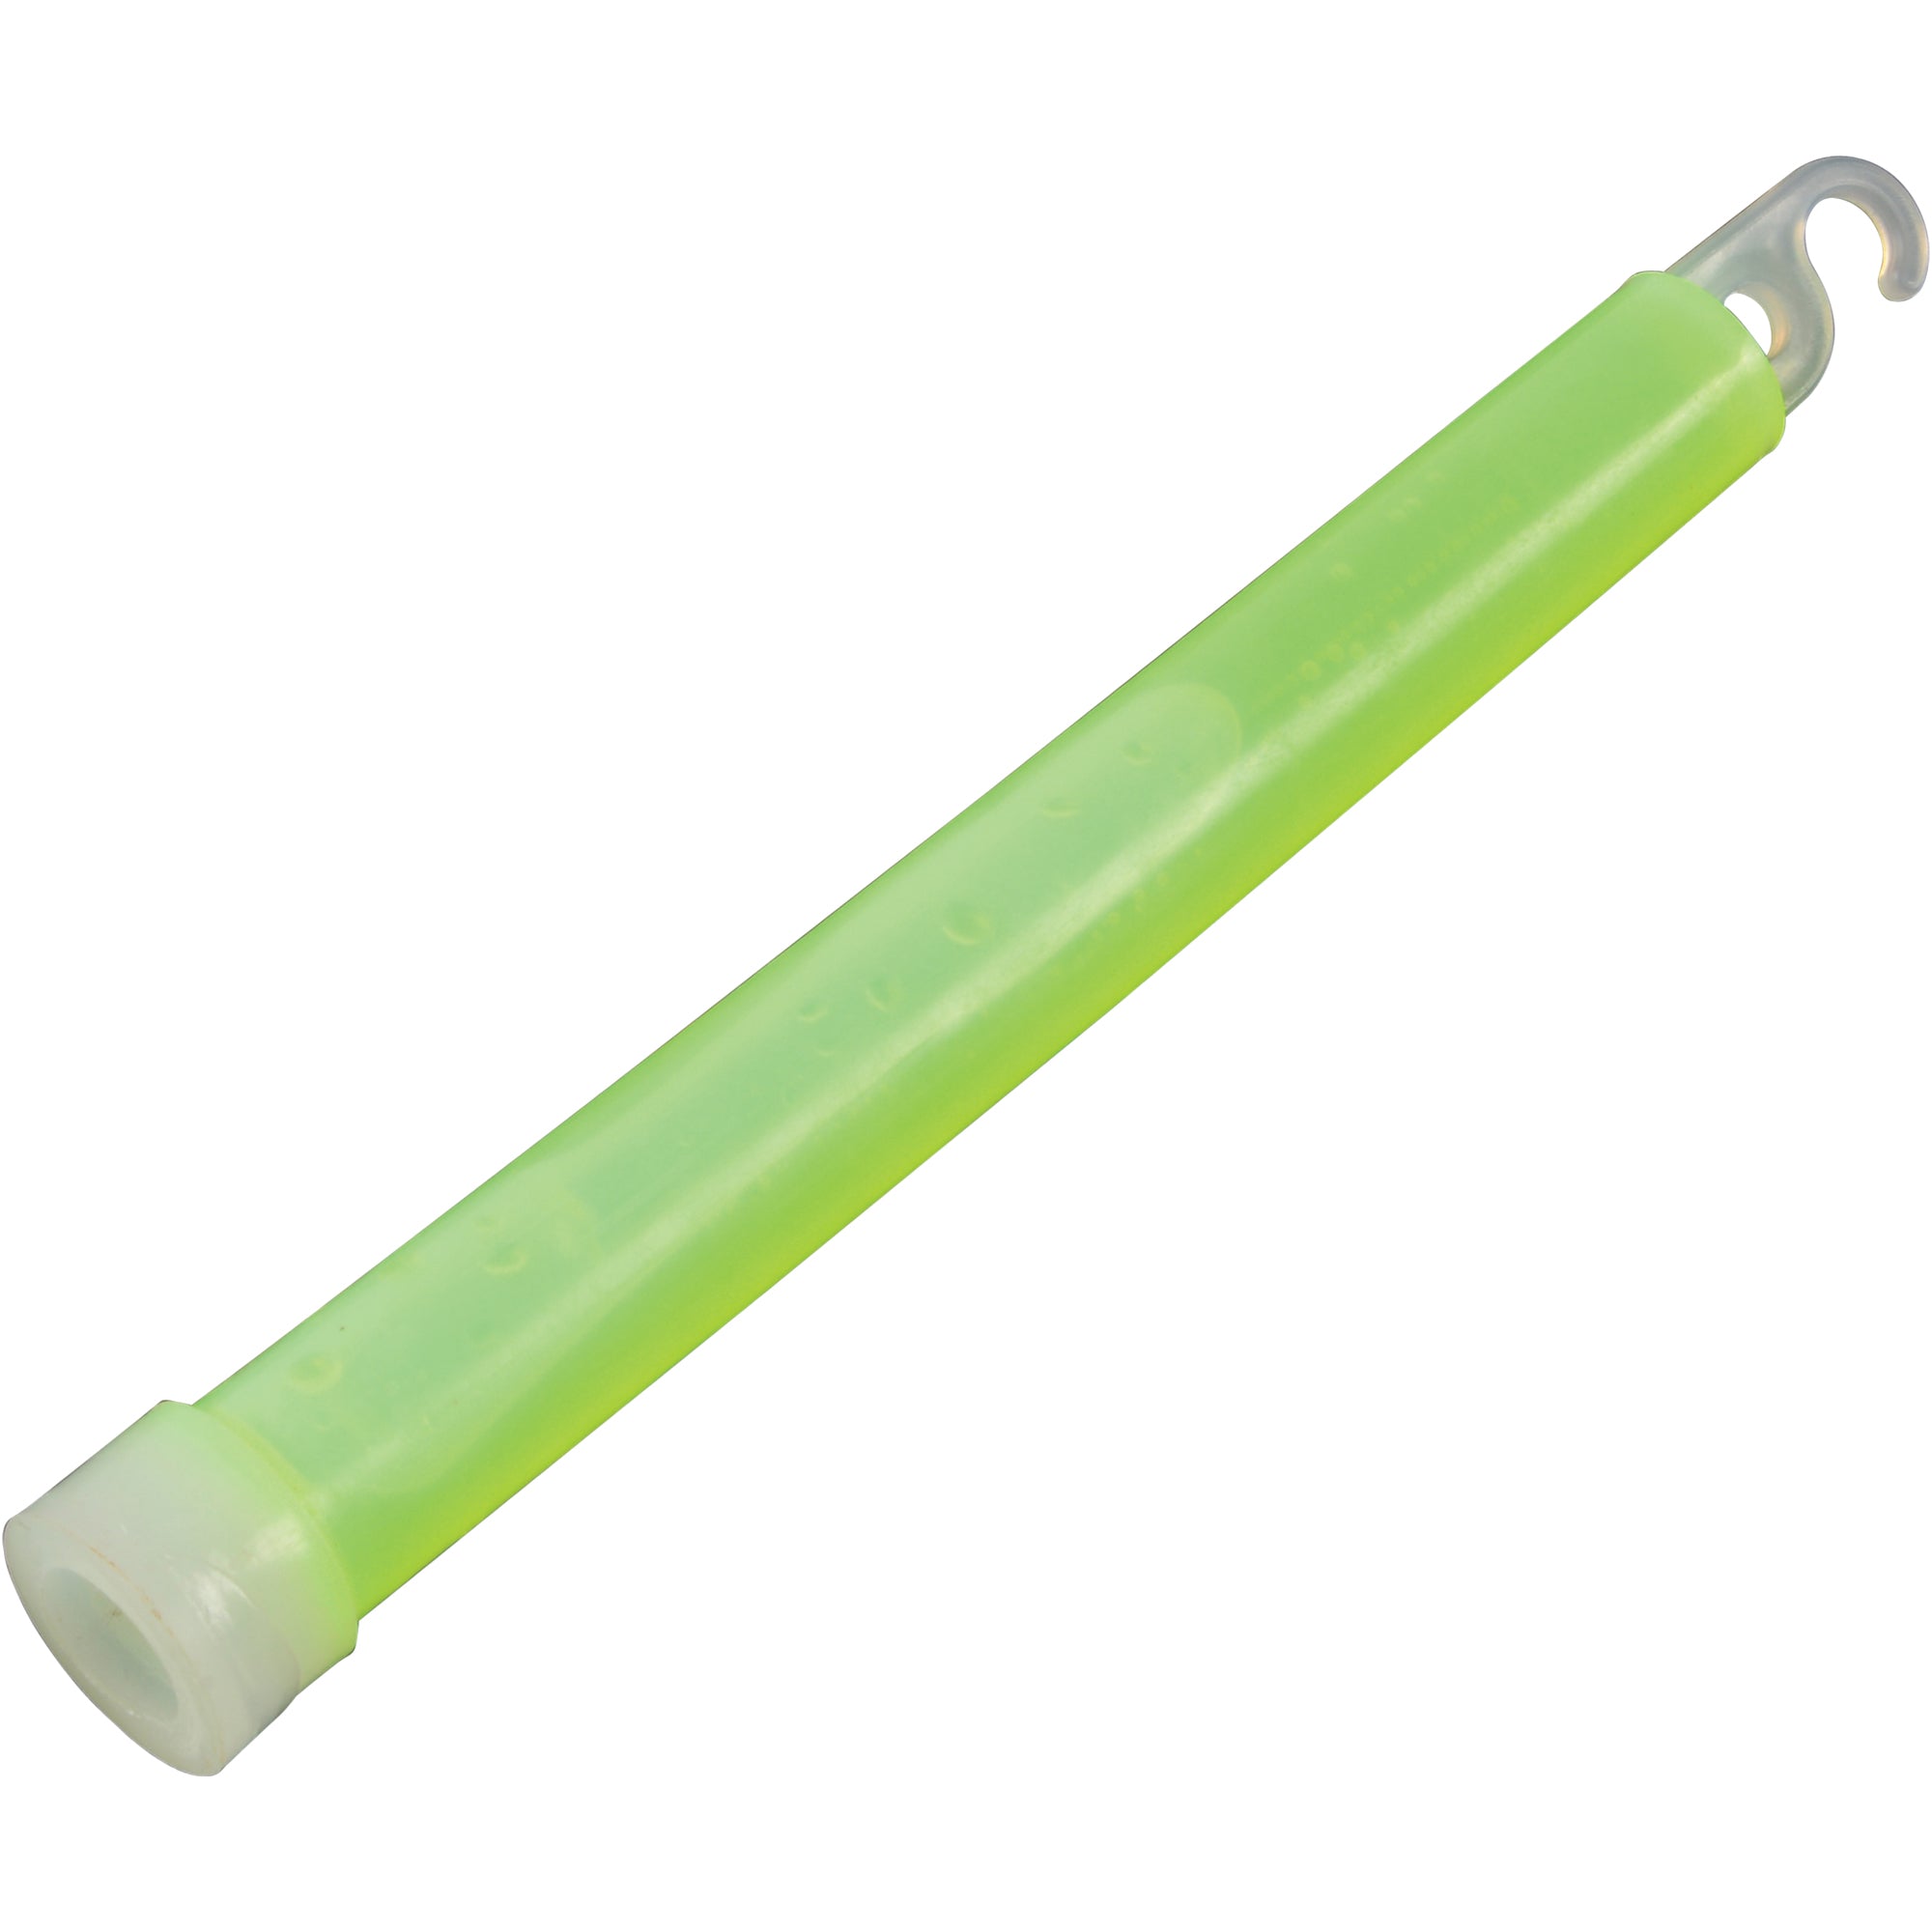 US Toy DK80 Light Up & Glow Stick 6 in.